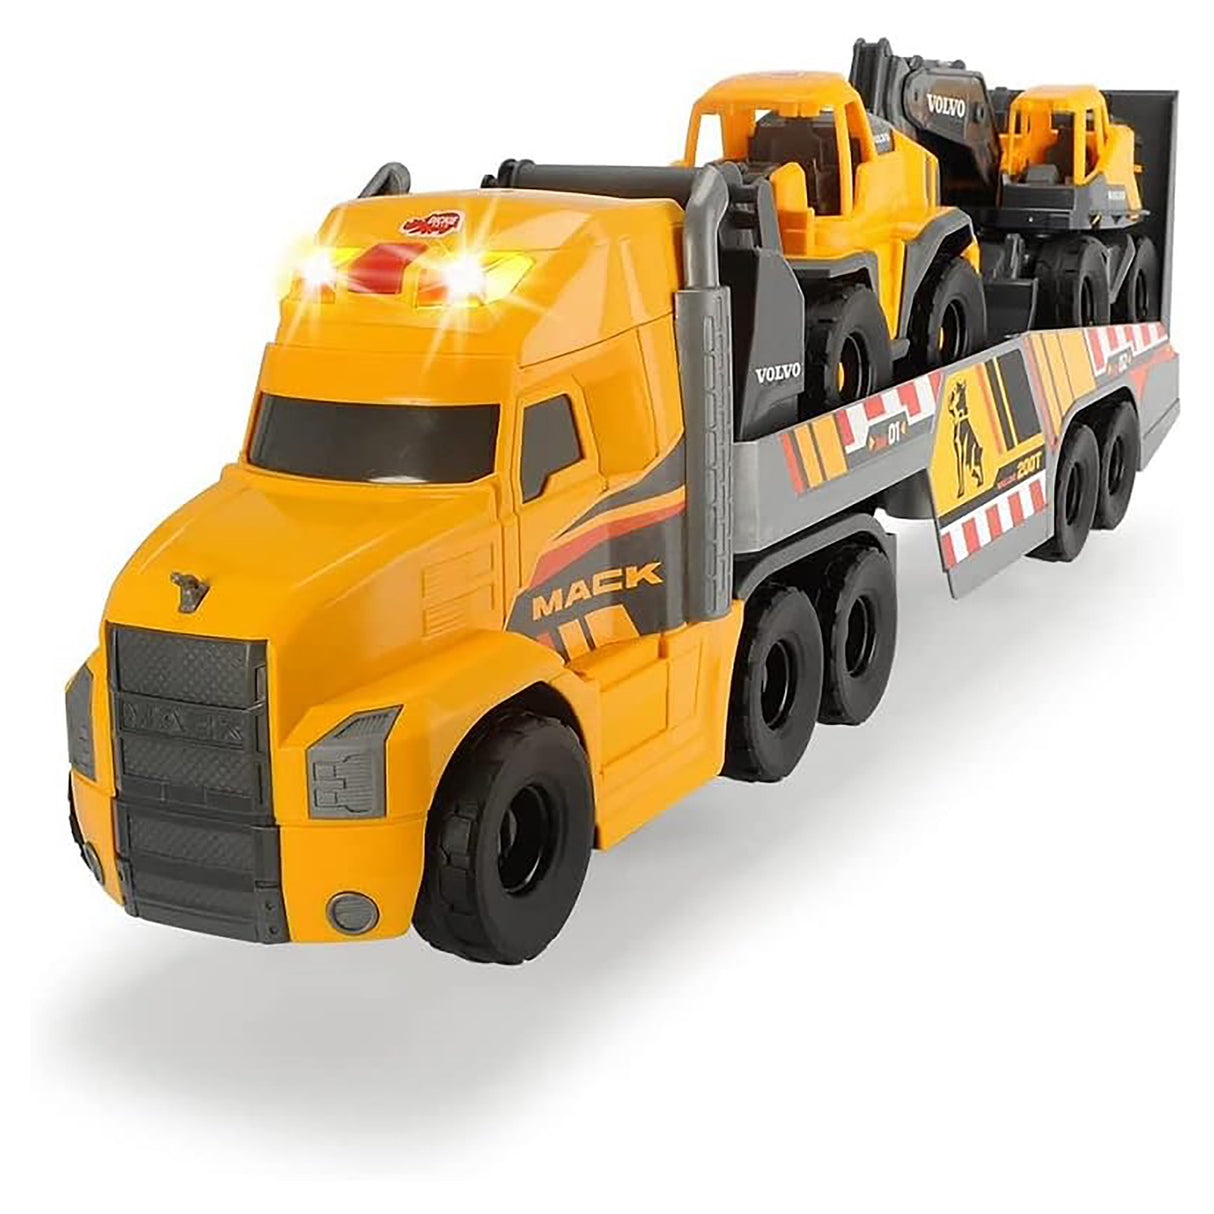 Dickie Toys Mack Truck With 2 Volvo Construction Vehicles